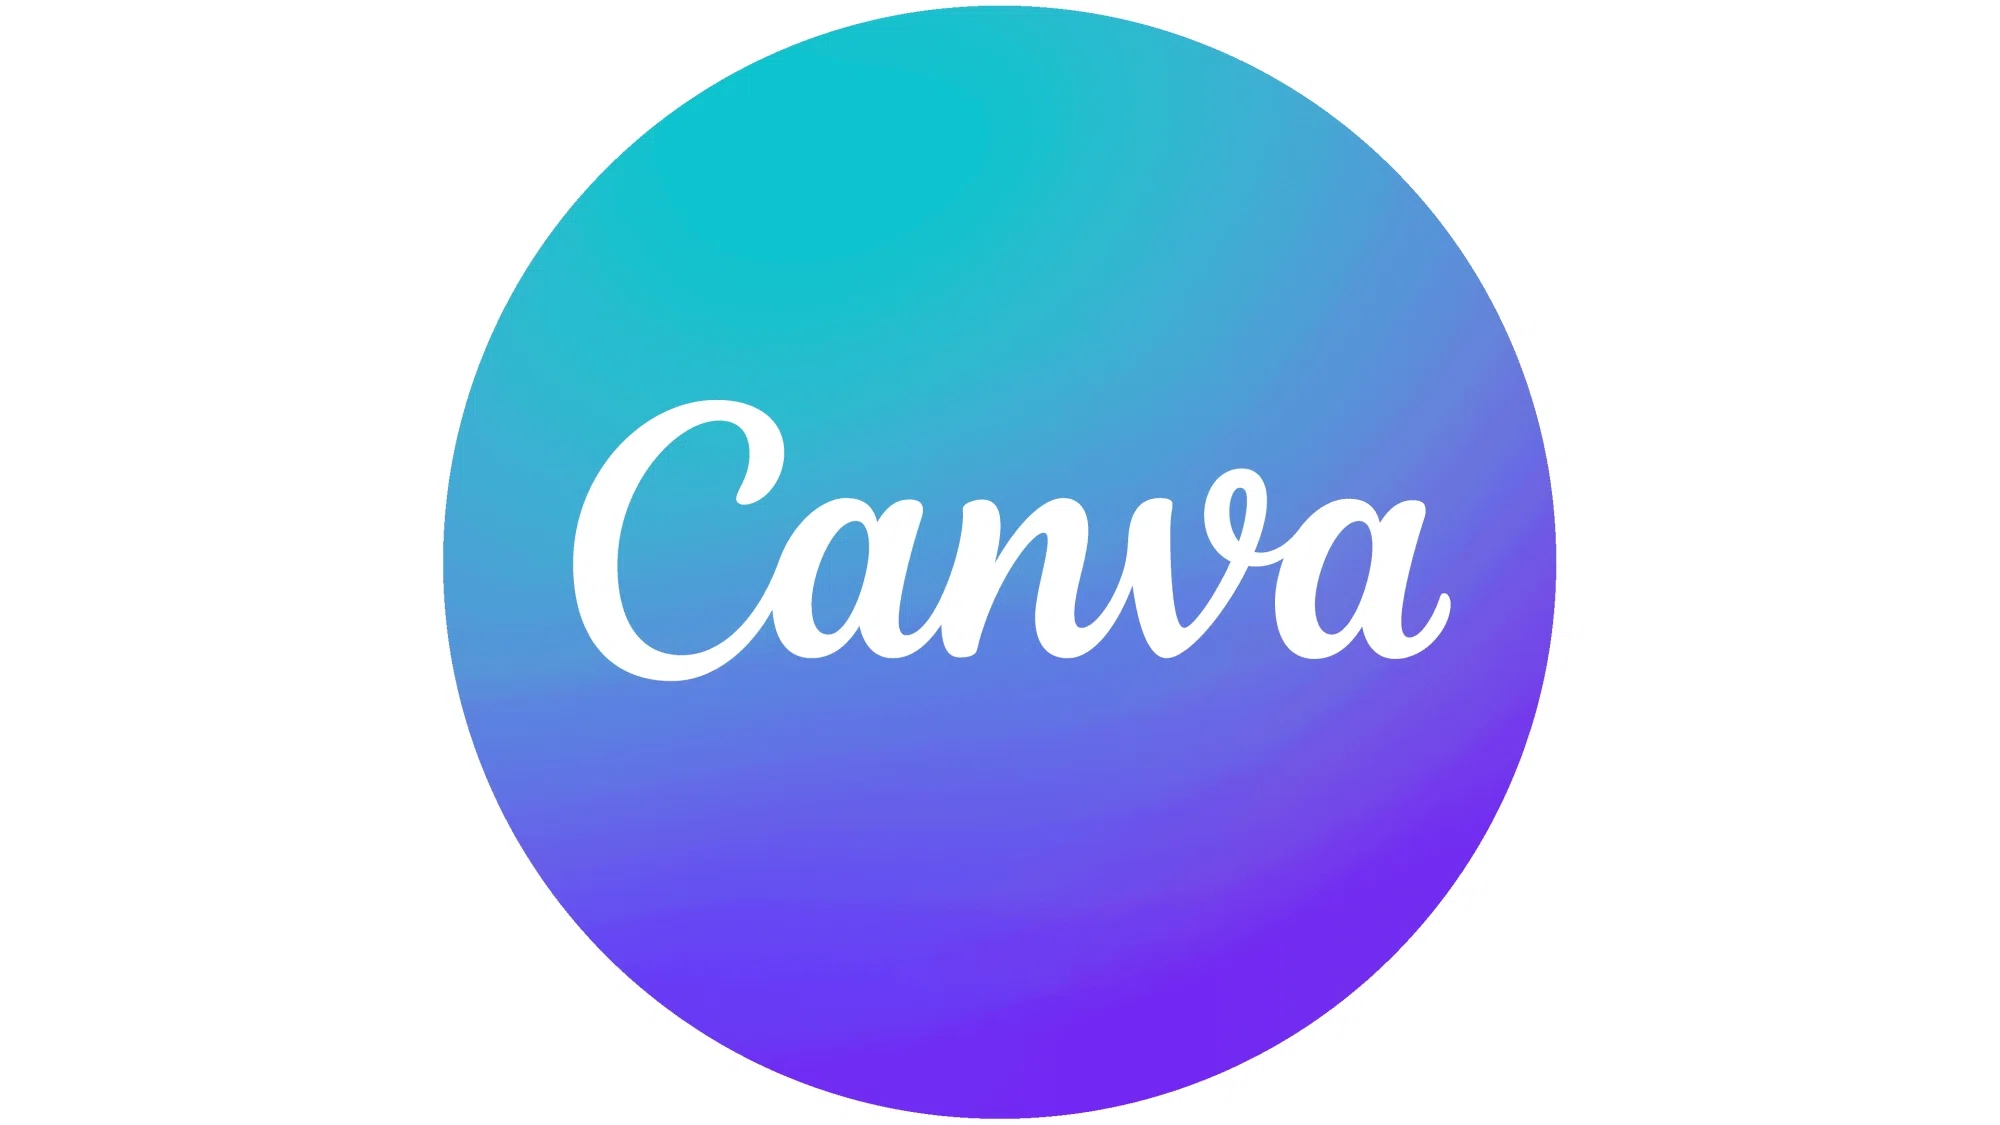 Canva government worker discount? — Knoji